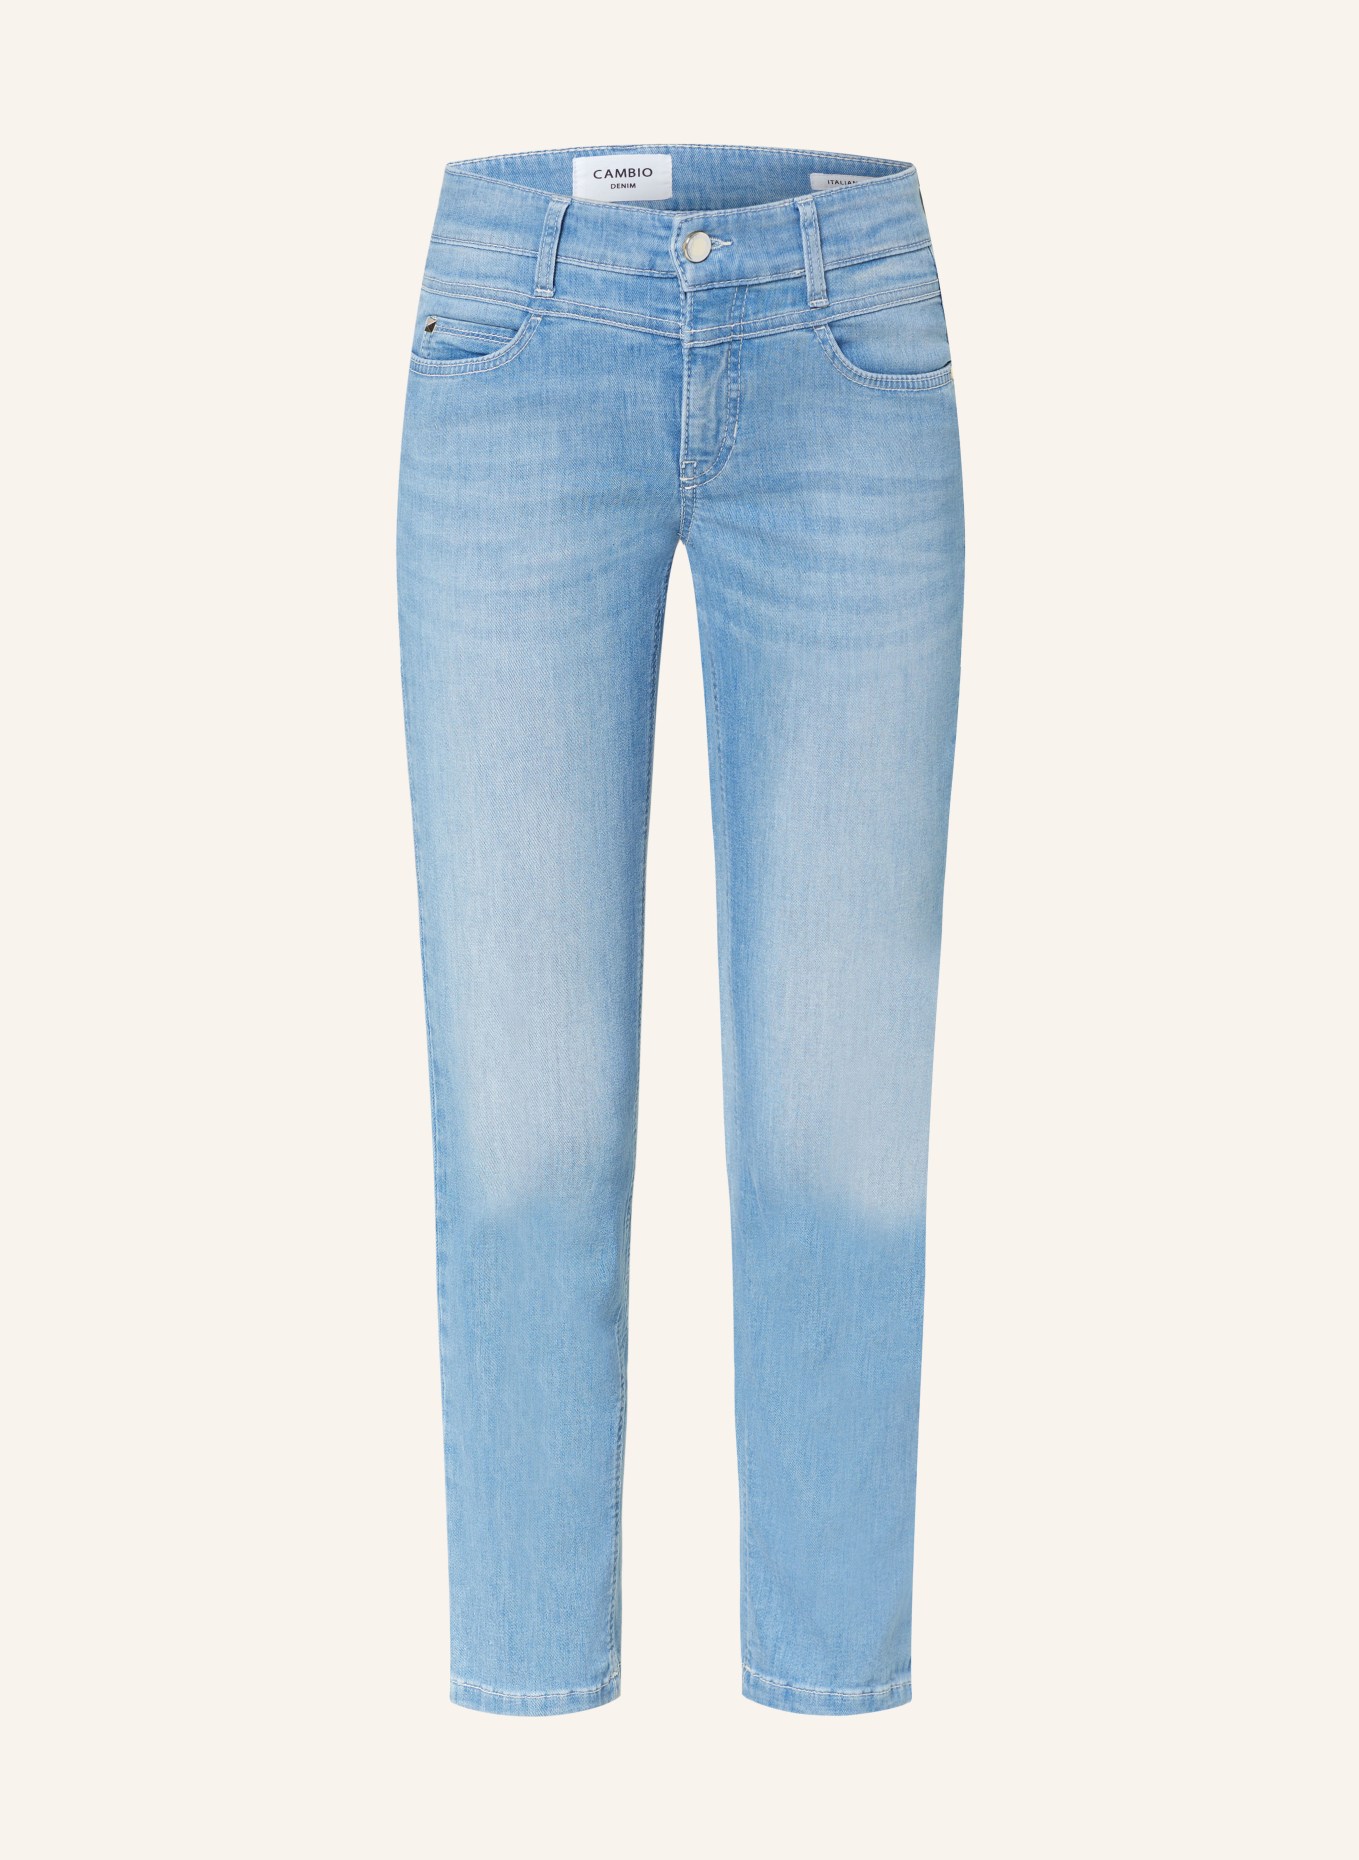 CAMBIO 7/8 jeans POSH, Color: 5230 sunny bleached contrast (Image 1)